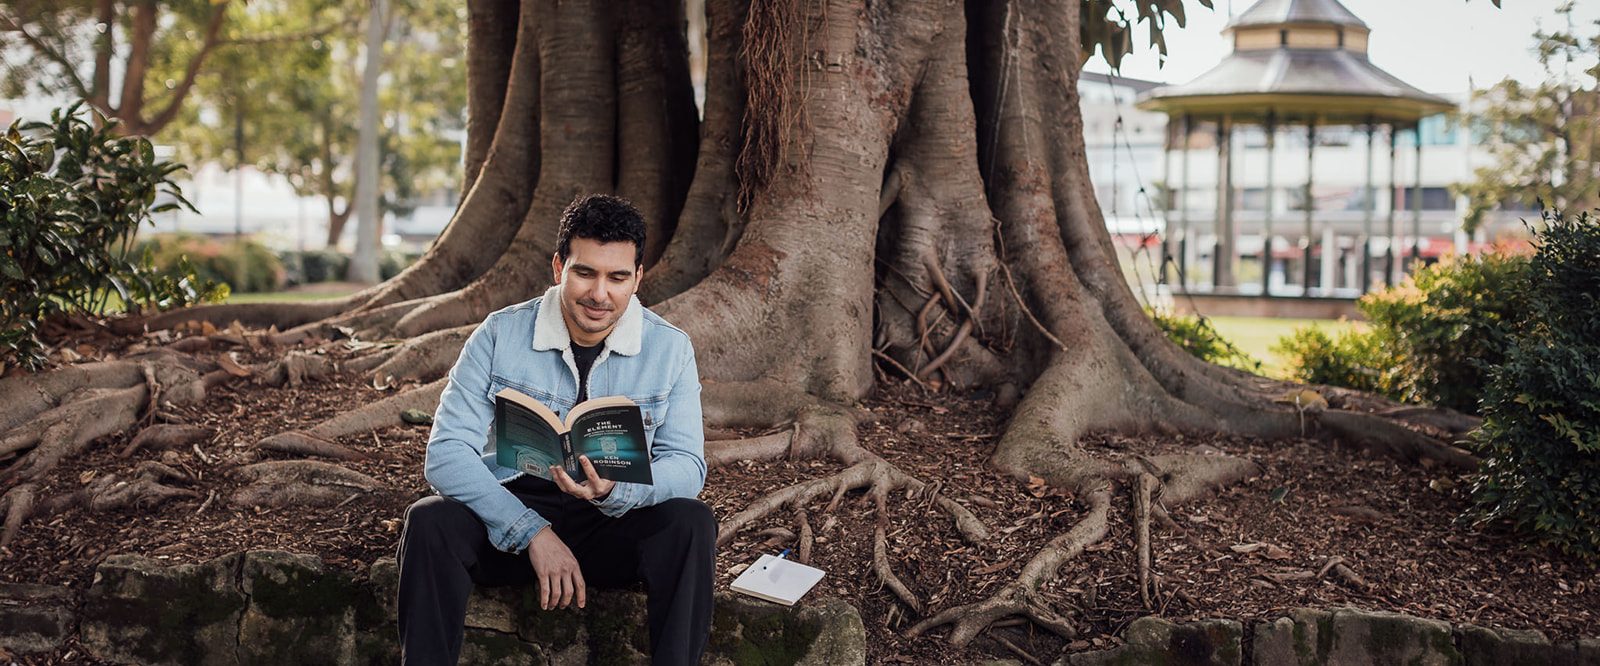 A man smiling and reading a book, sitting under a tree.